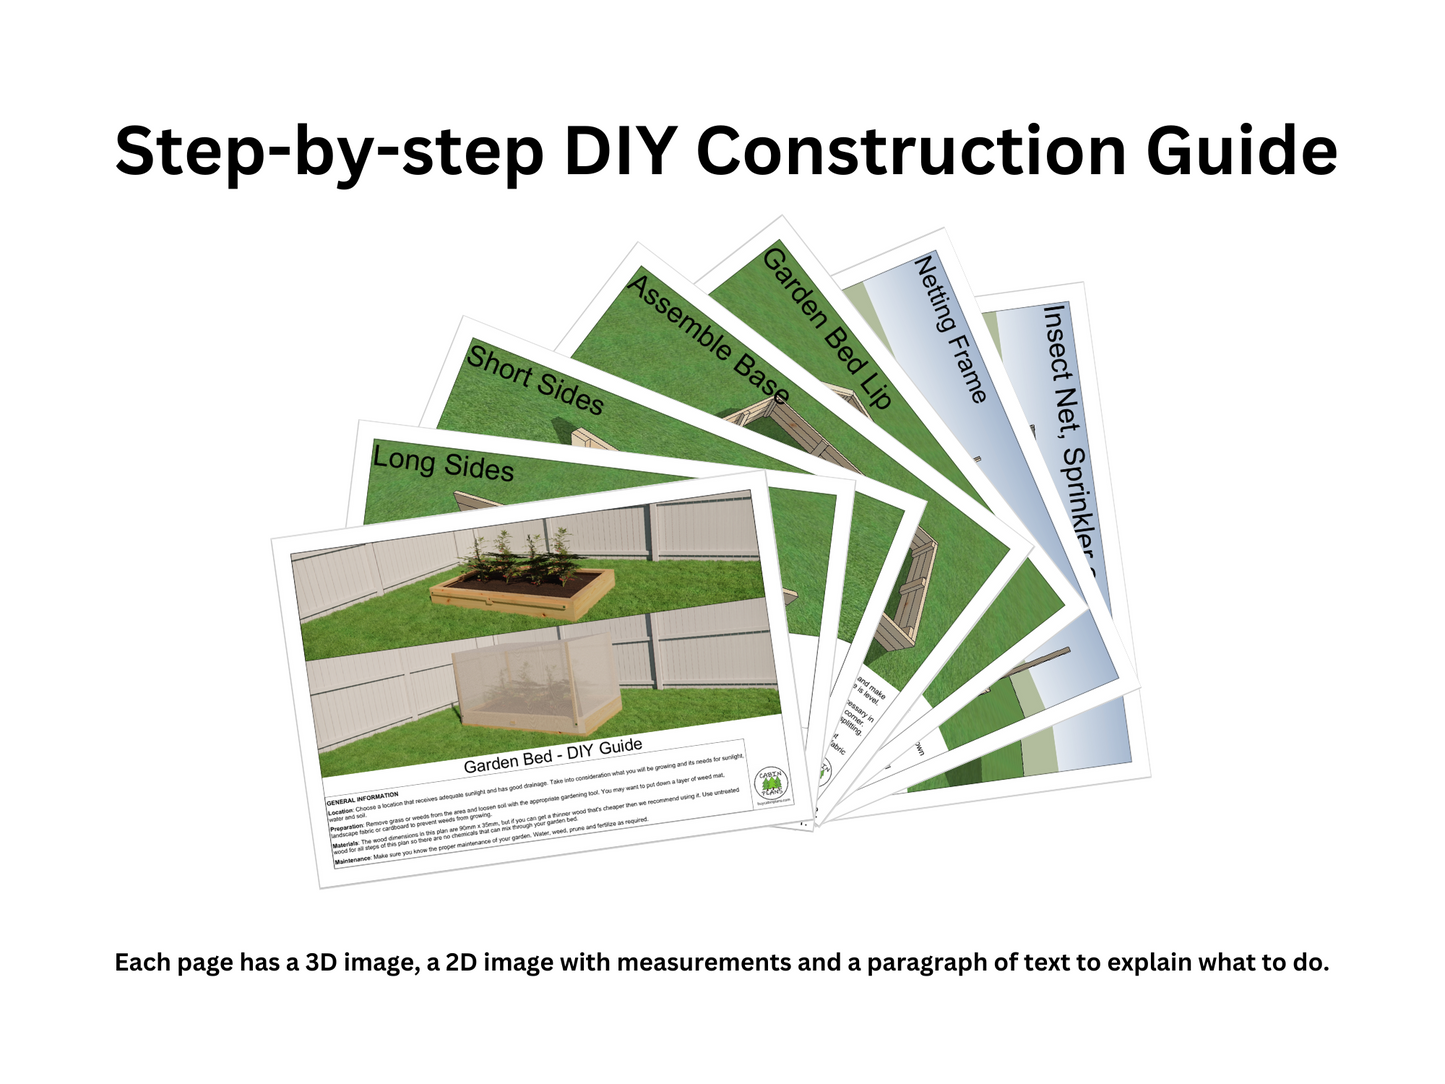 Simple Garden Bed - Step-By-Step DIY Construction Guide and Materials List | 2.4m x 1.2m (7'10" x 3'11") - Veggie Garden